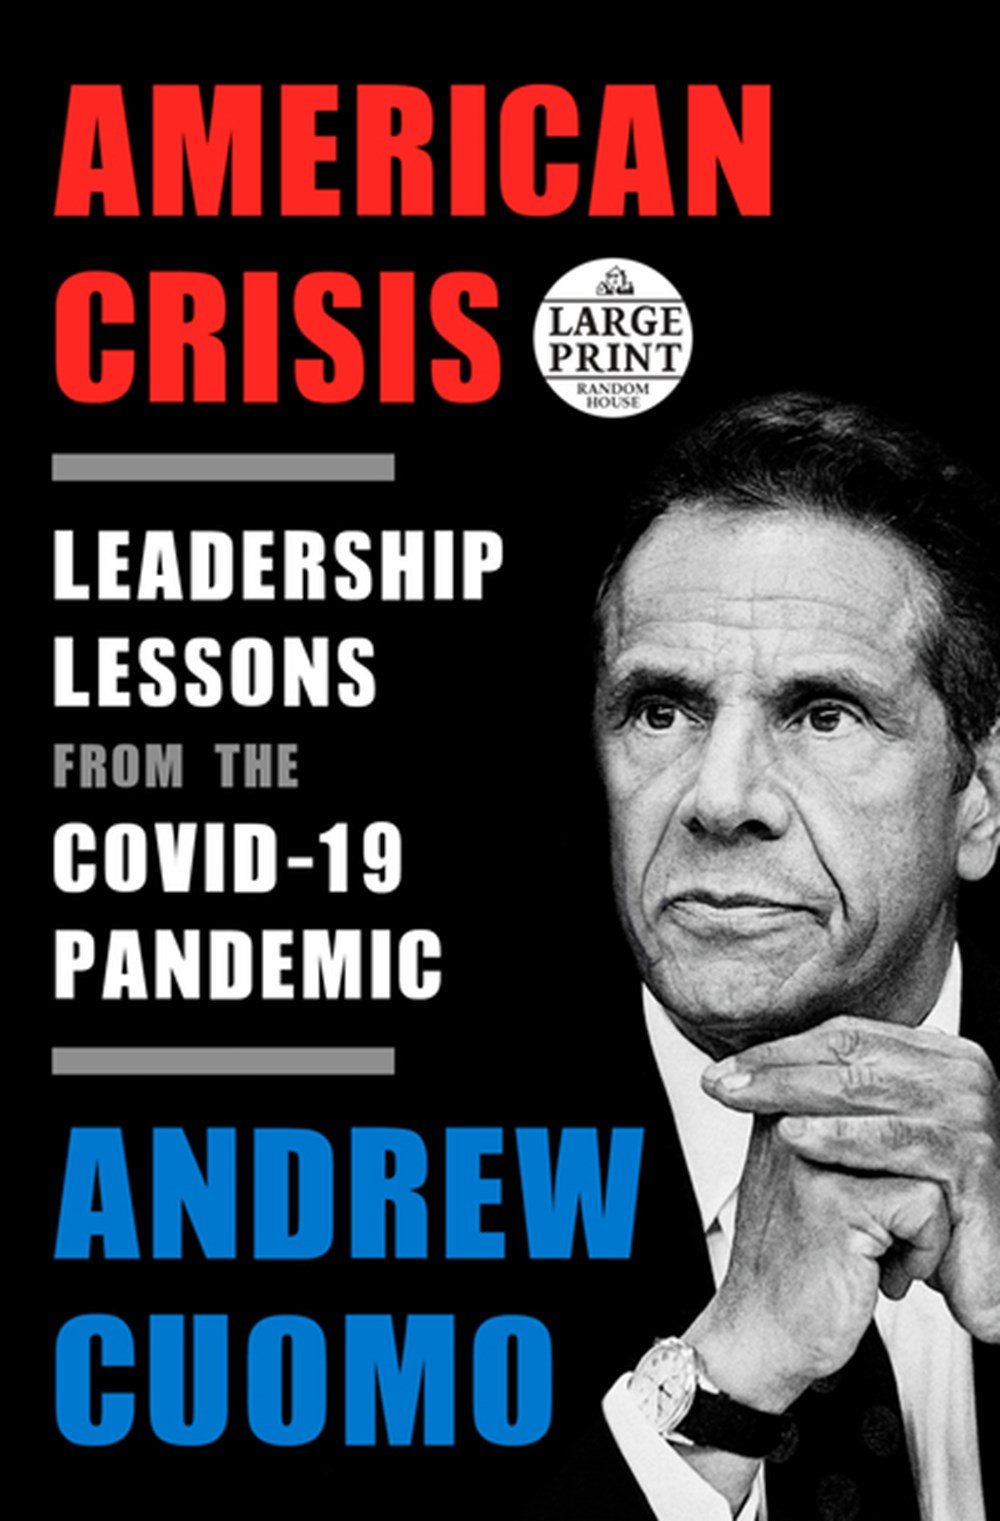 American Crisis Leadership Lessons from the Covid-19 Pandemic